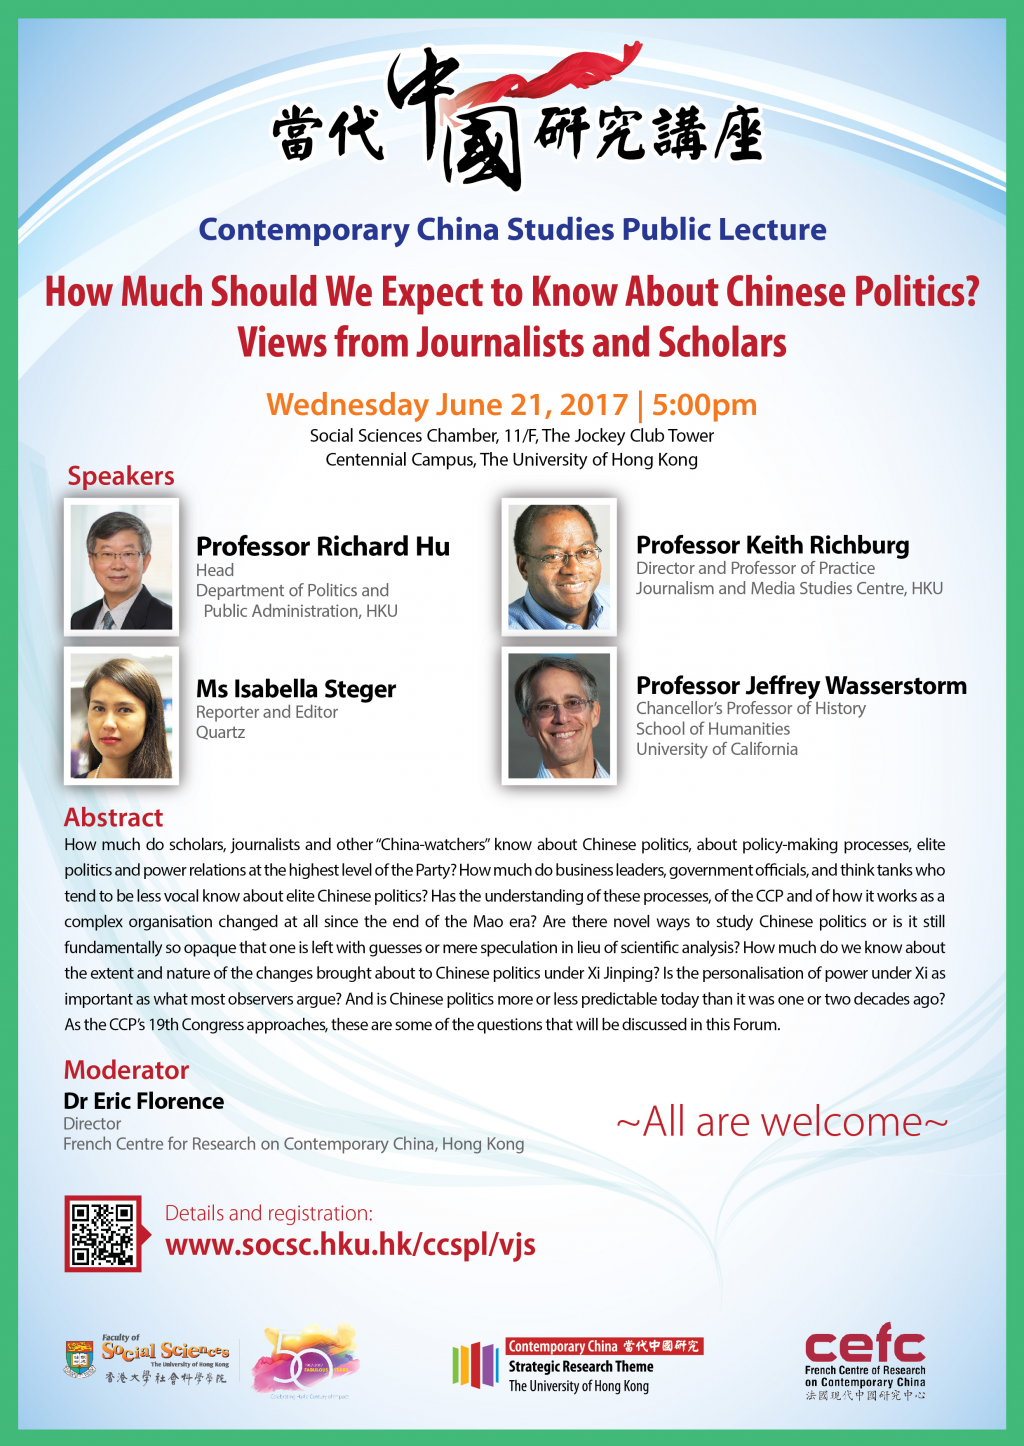 How Much Should We Expect to Know About Chinese Politics?